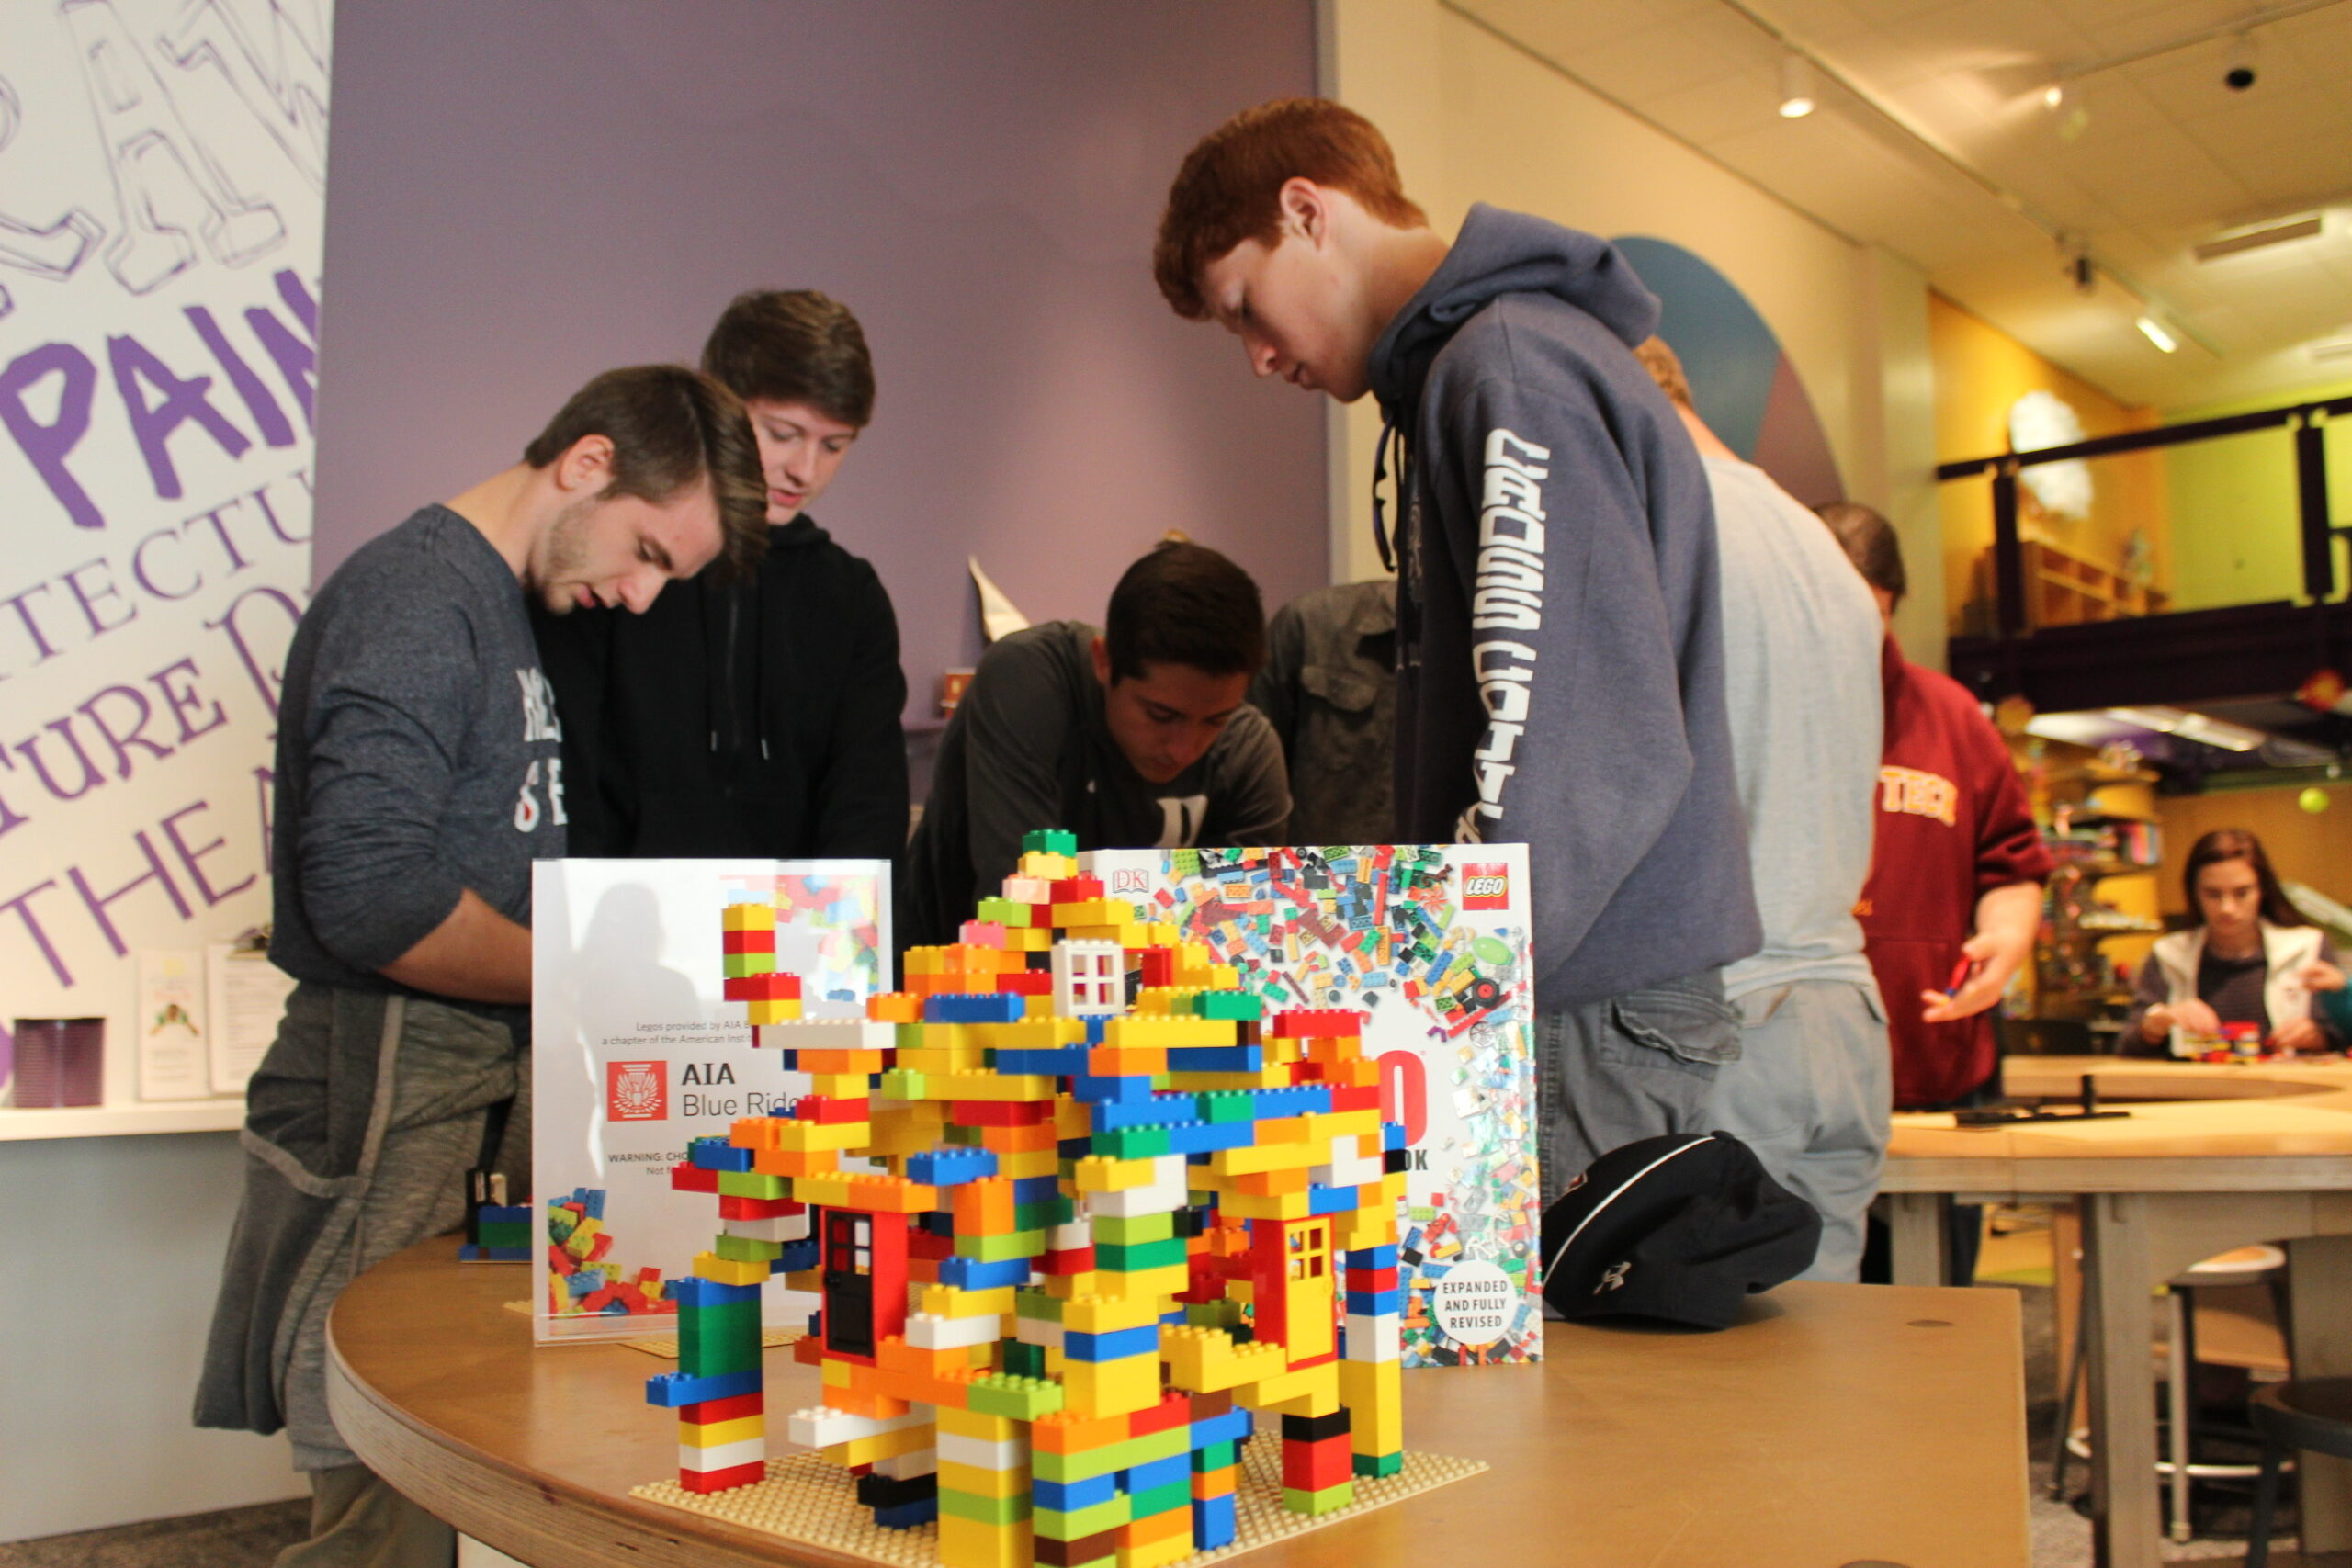 A building created from Legos stands on a table in the foreground of the picture as 4 teenagers actively build their owns Lego sculptures